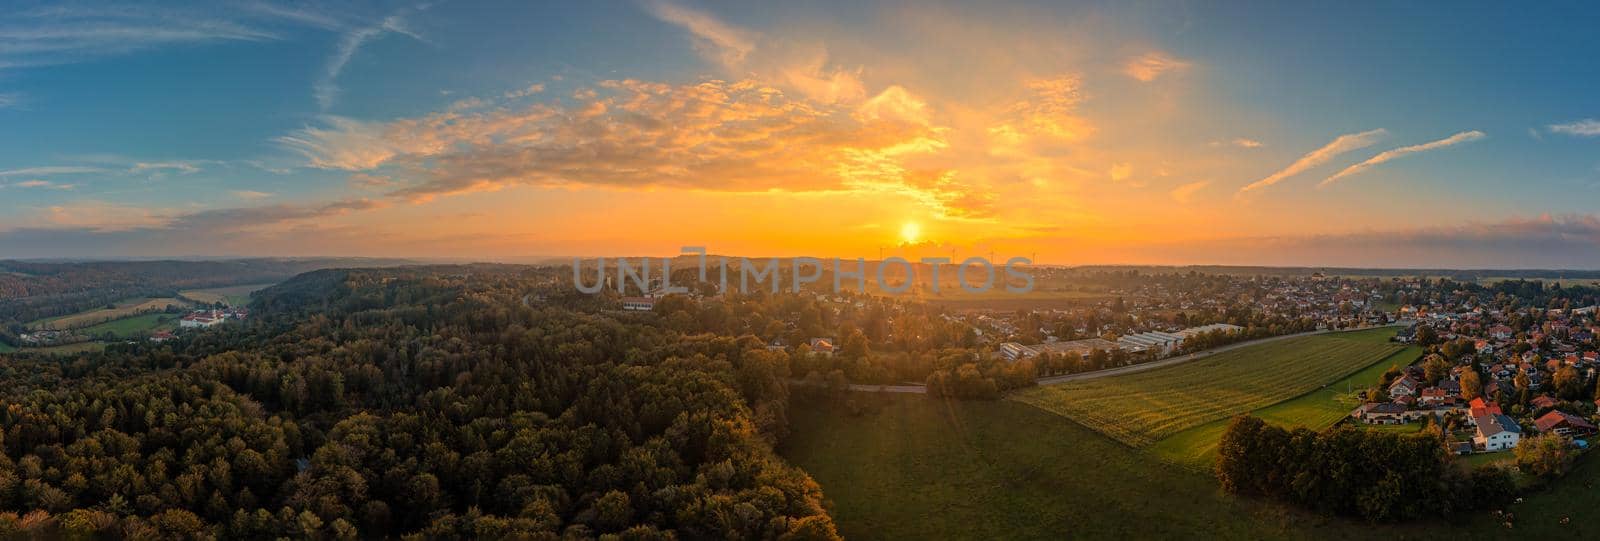 Sunset view over the beautiful landscape in southern bavaria with the monastery of Schaeftlarn. by AllesSuper